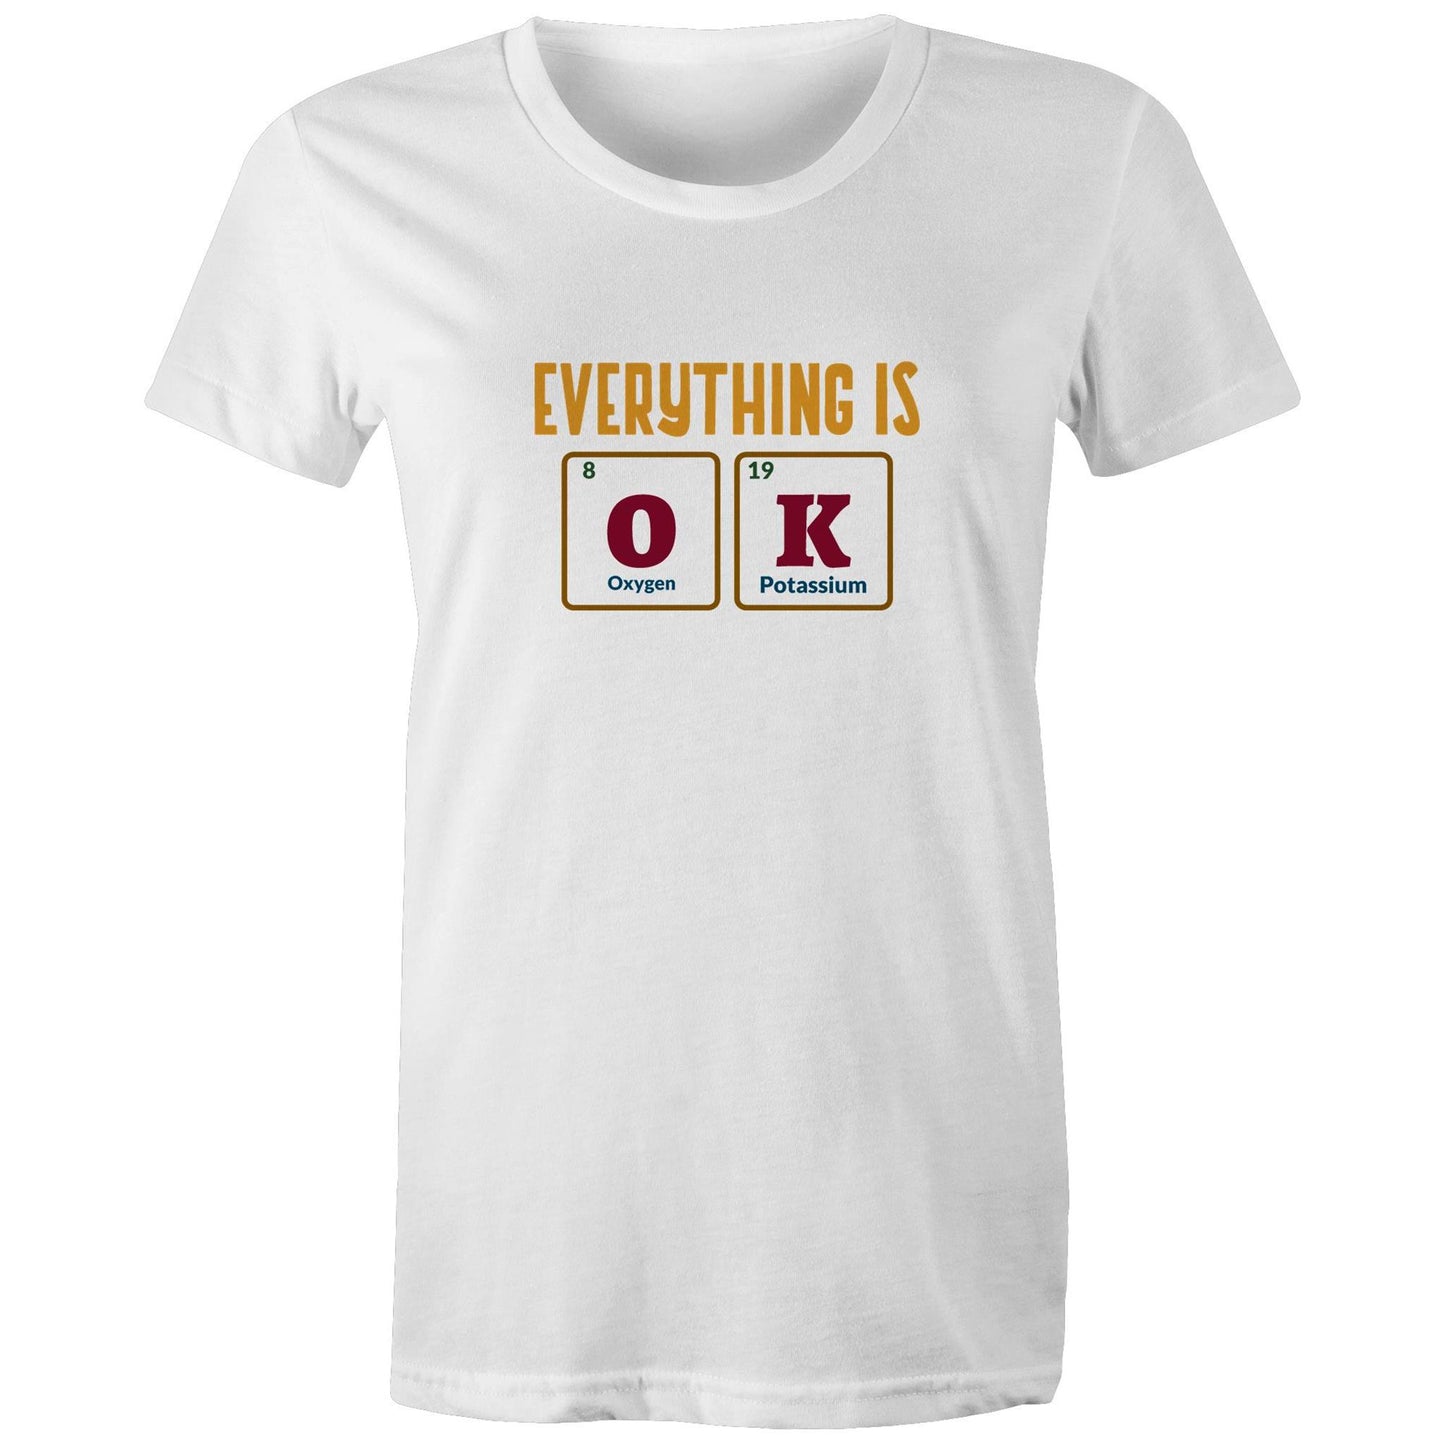 Everything Is OK, Periodic Table Of Elements - Womens T-shirt White Womens T-shirt Science